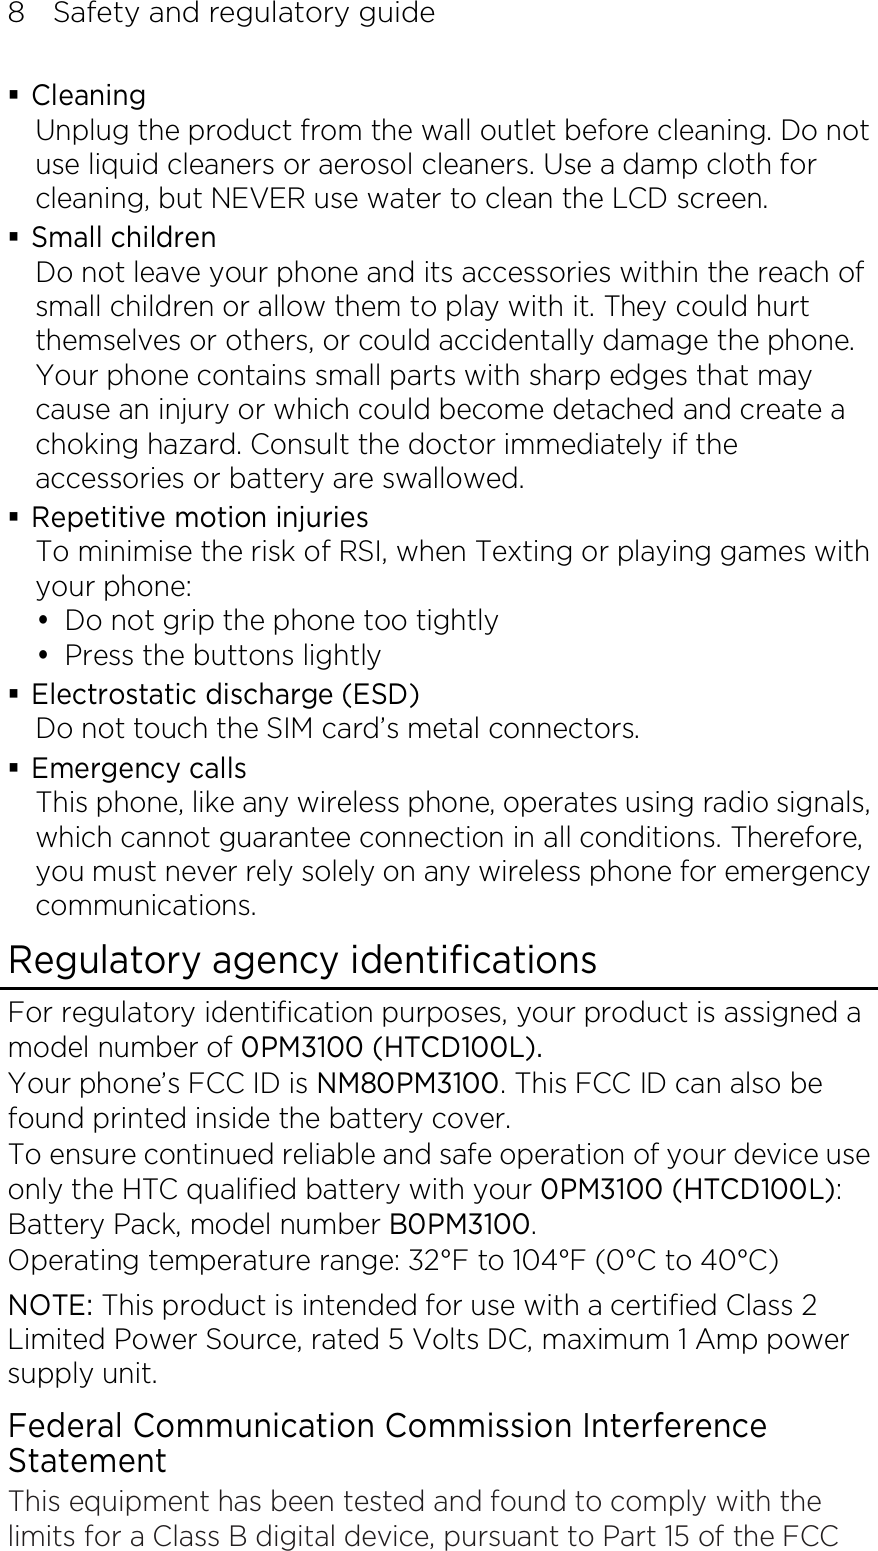 8    Safety and regulatory guide  Cleaning Unplug the product from the wall outlet before cleaning. Do not use liquid cleaners or aerosol cleaners. Use a damp cloth for cleaning, but NEVER use water to clean the LCD screen.    Small children Do not leave your phone and its accessories within the reach of small children or allow them to play with it. They could hurt themselves or others, or could accidentally damage the phone. Your phone contains small parts with sharp edges that may cause an injury or which could become detached and create a choking hazard. Consult the doctor immediately if the accessories or battery are swallowed.  Repetitive motion injuries To minimise the risk of RSI, when Texting or playing games with your phone:  Do not grip the phone too tightly  Press the buttons lightly  Electrostatic discharge (ESD) Do not touch the SIM card’s metal connectors.    Emergency calls This phone, like any wireless phone, operates using radio signals, which cannot guarantee connection in all conditions. Therefore, you must never rely solely on any wireless phone for emergency communications. Regulatory agency identifications For regulatory identification purposes, your product is assigned a model number of 0PM3100 (HTCD100L). Your phone’s FCC ID is NM80PM3100. This FCC ID can also be found printed inside the battery cover. To ensure continued reliable and safe operation of your device use only the HTC qualified battery with your 0PM3100 (HTCD100L): Battery Pack, model number B0PM3100. Operating temperature range: 32°F to 104°F (0°C to 40°C) NOTE: This product is intended for use with a certified Class 2 Limited Power Source, rated 5 Volts DC, maximum 1 Amp power supply unit. Federal Communication Commission Interference Statement This equipment has been tested and found to comply with the limits for a Class B digital device, pursuant to Part 15 of the FCC 